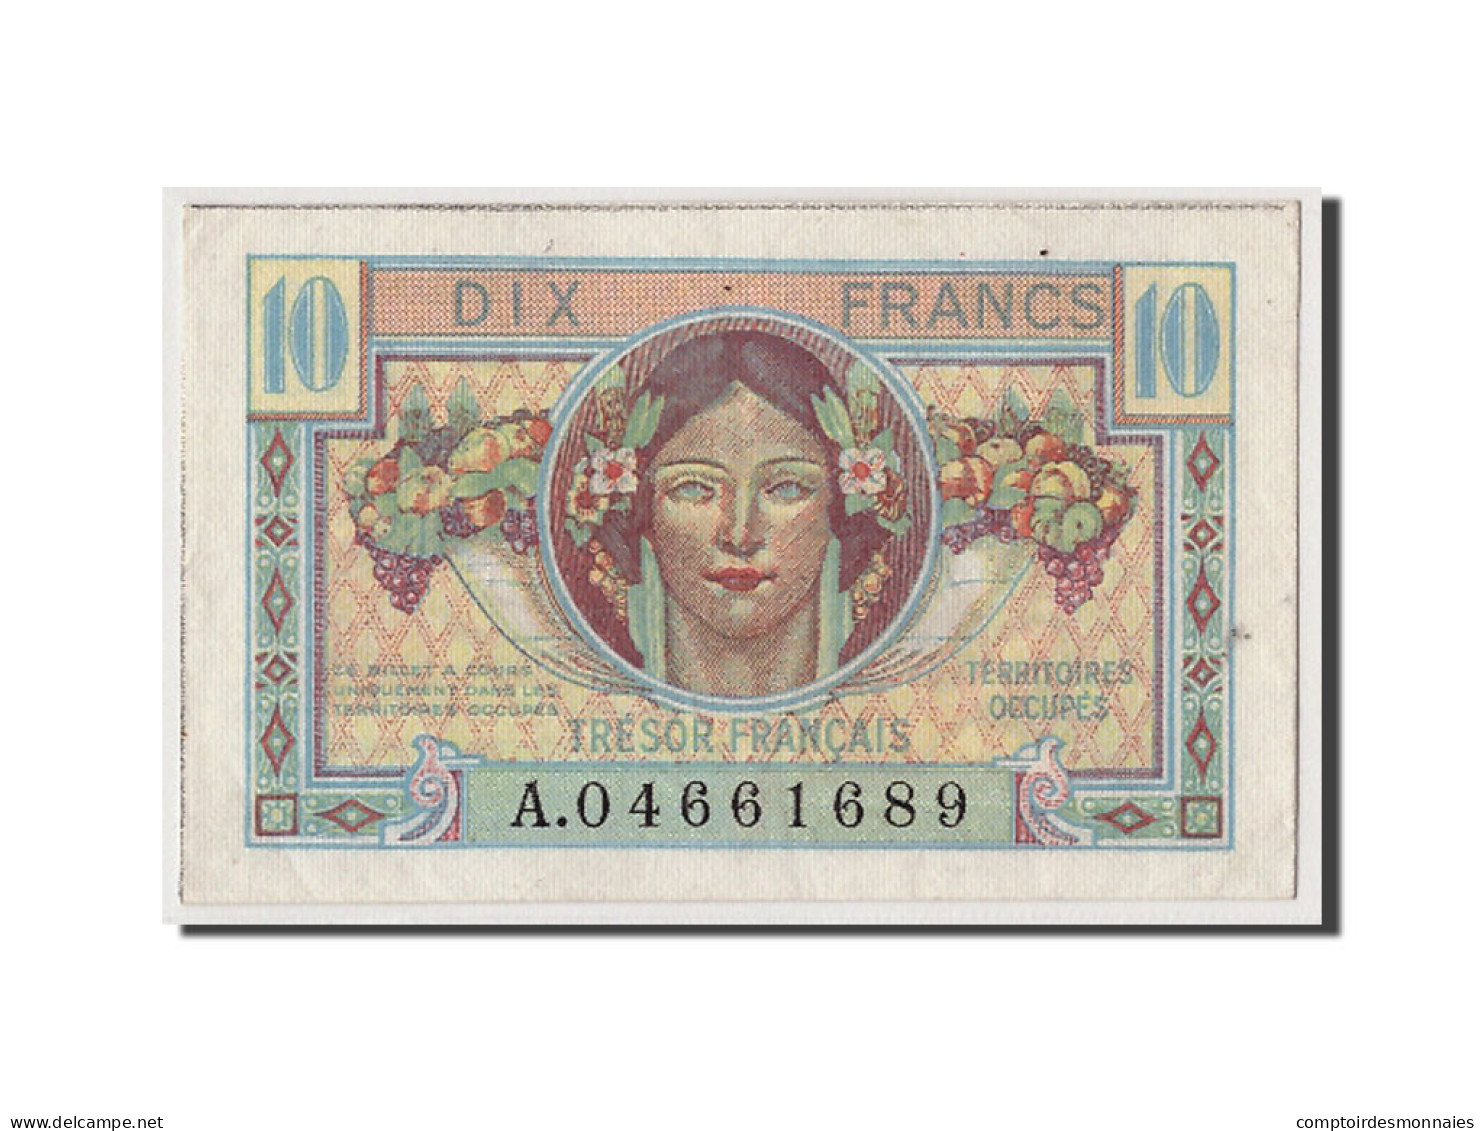 Billet, France, 10 Francs, 1947 French Treasury, Undated (1947), Undated, SPL - 1947 French Treasury